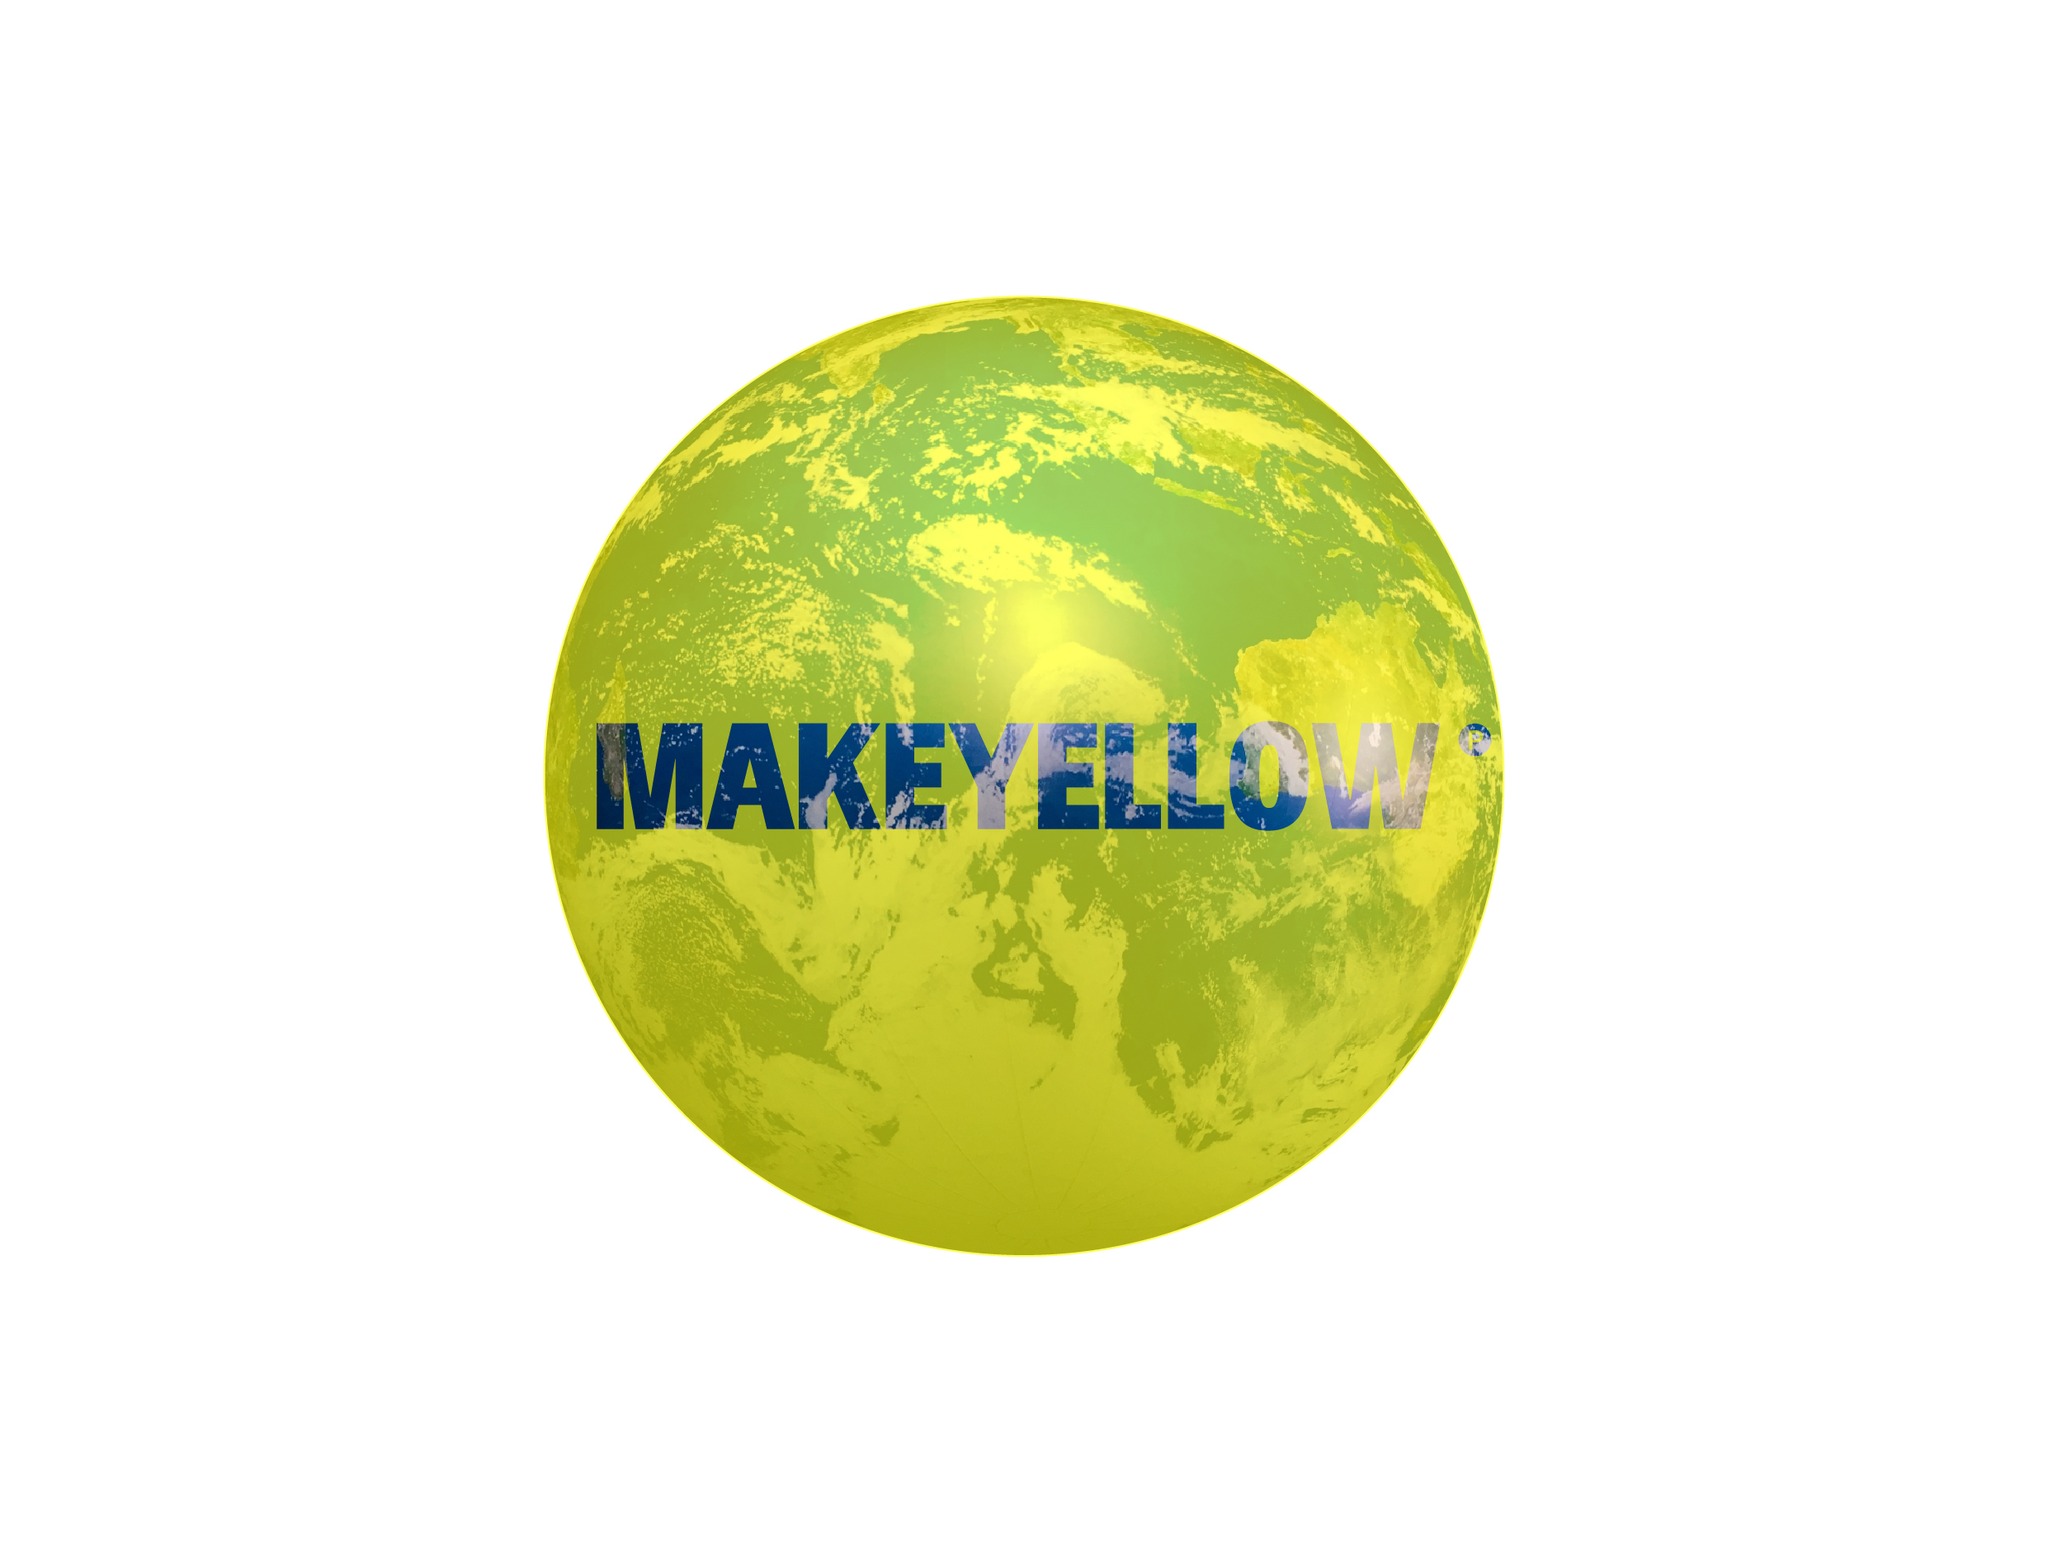 MAKEYELLOW project OFFICIAL SITE